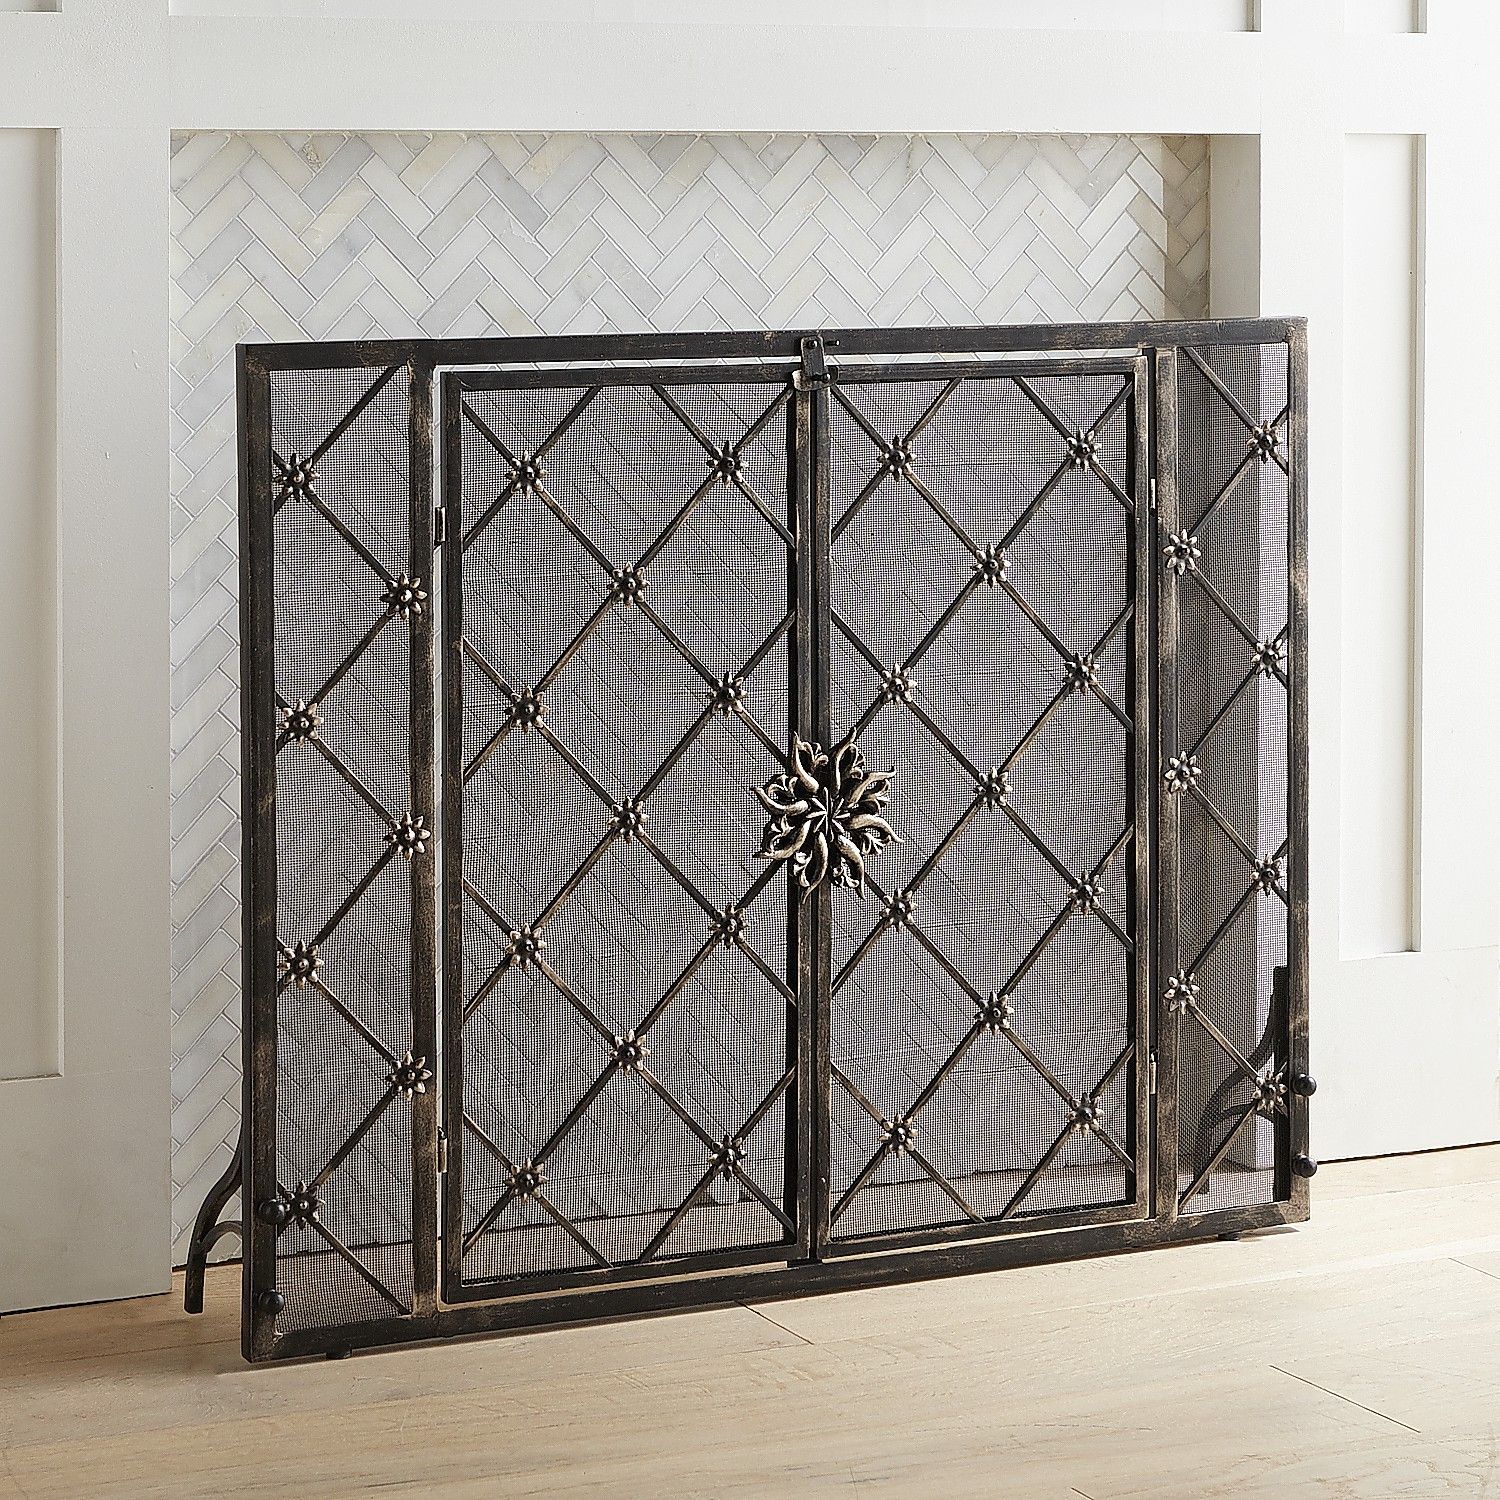 Fireplace Door Cover Fresh Junction Fireplace Screen In 2019 Products